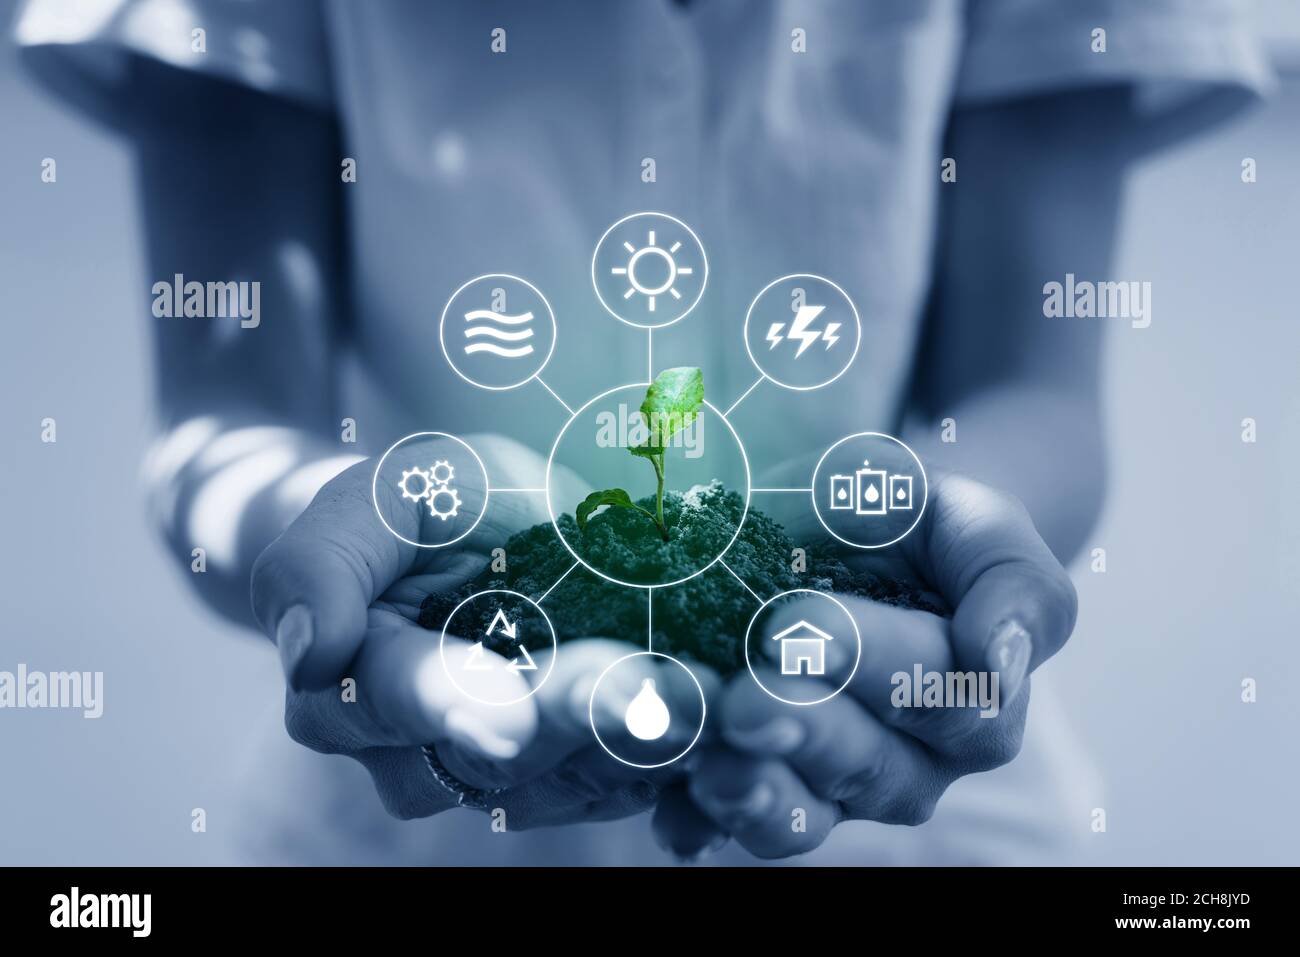 Clean energy and Natural energy resources. Woman hand holding sprout, with energy resource icon Stock Photo